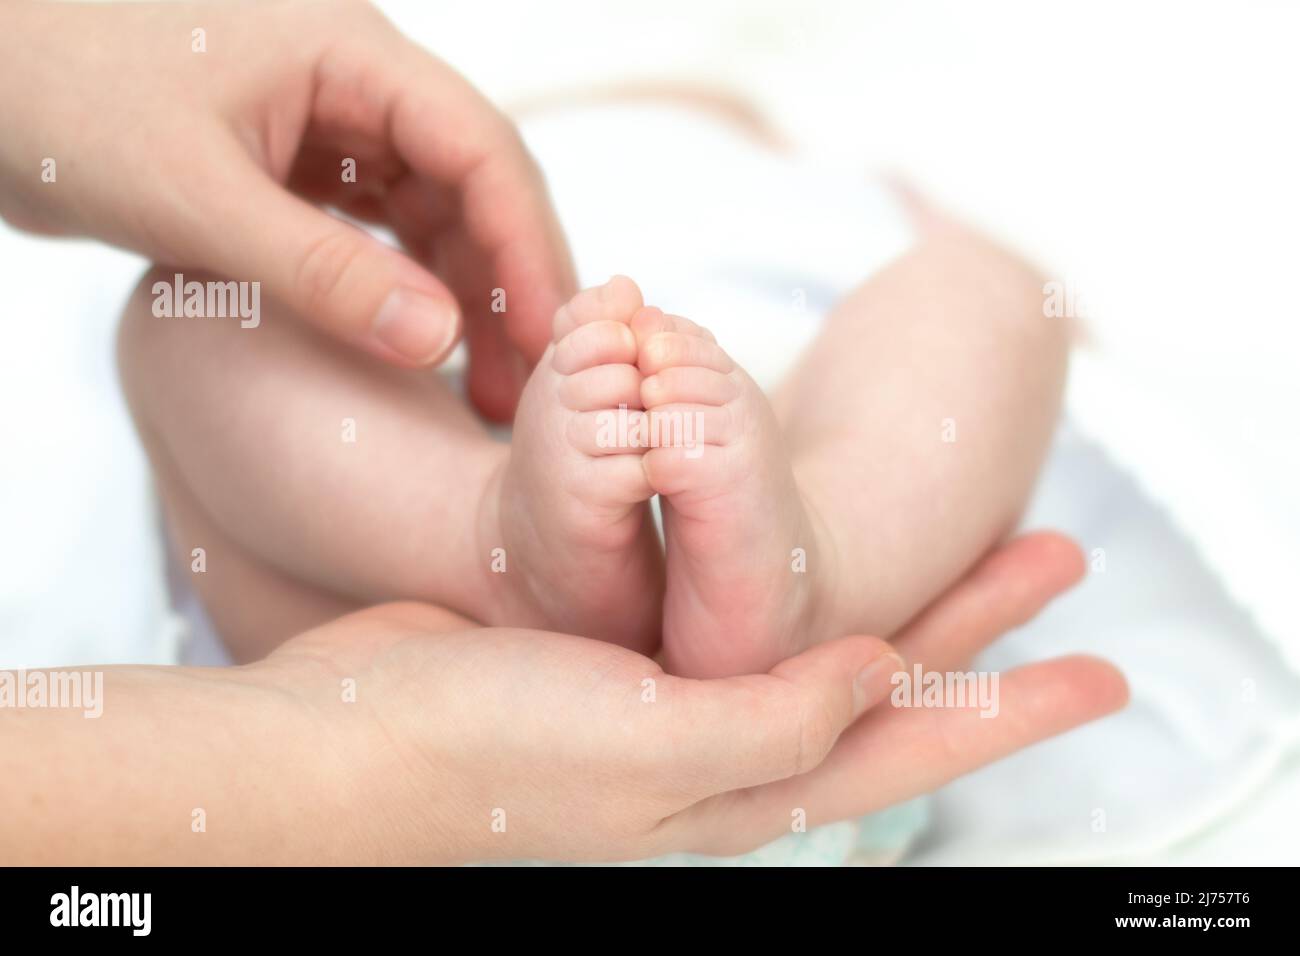 https://c8.alamy.com/comp/2J757T6/the-mothers-hands-tenderly-and-lovingly-hold-the-legs-of-a-small-child-who-is-several-months-old-from-the-moment-of-birth-2J757T6.jpg